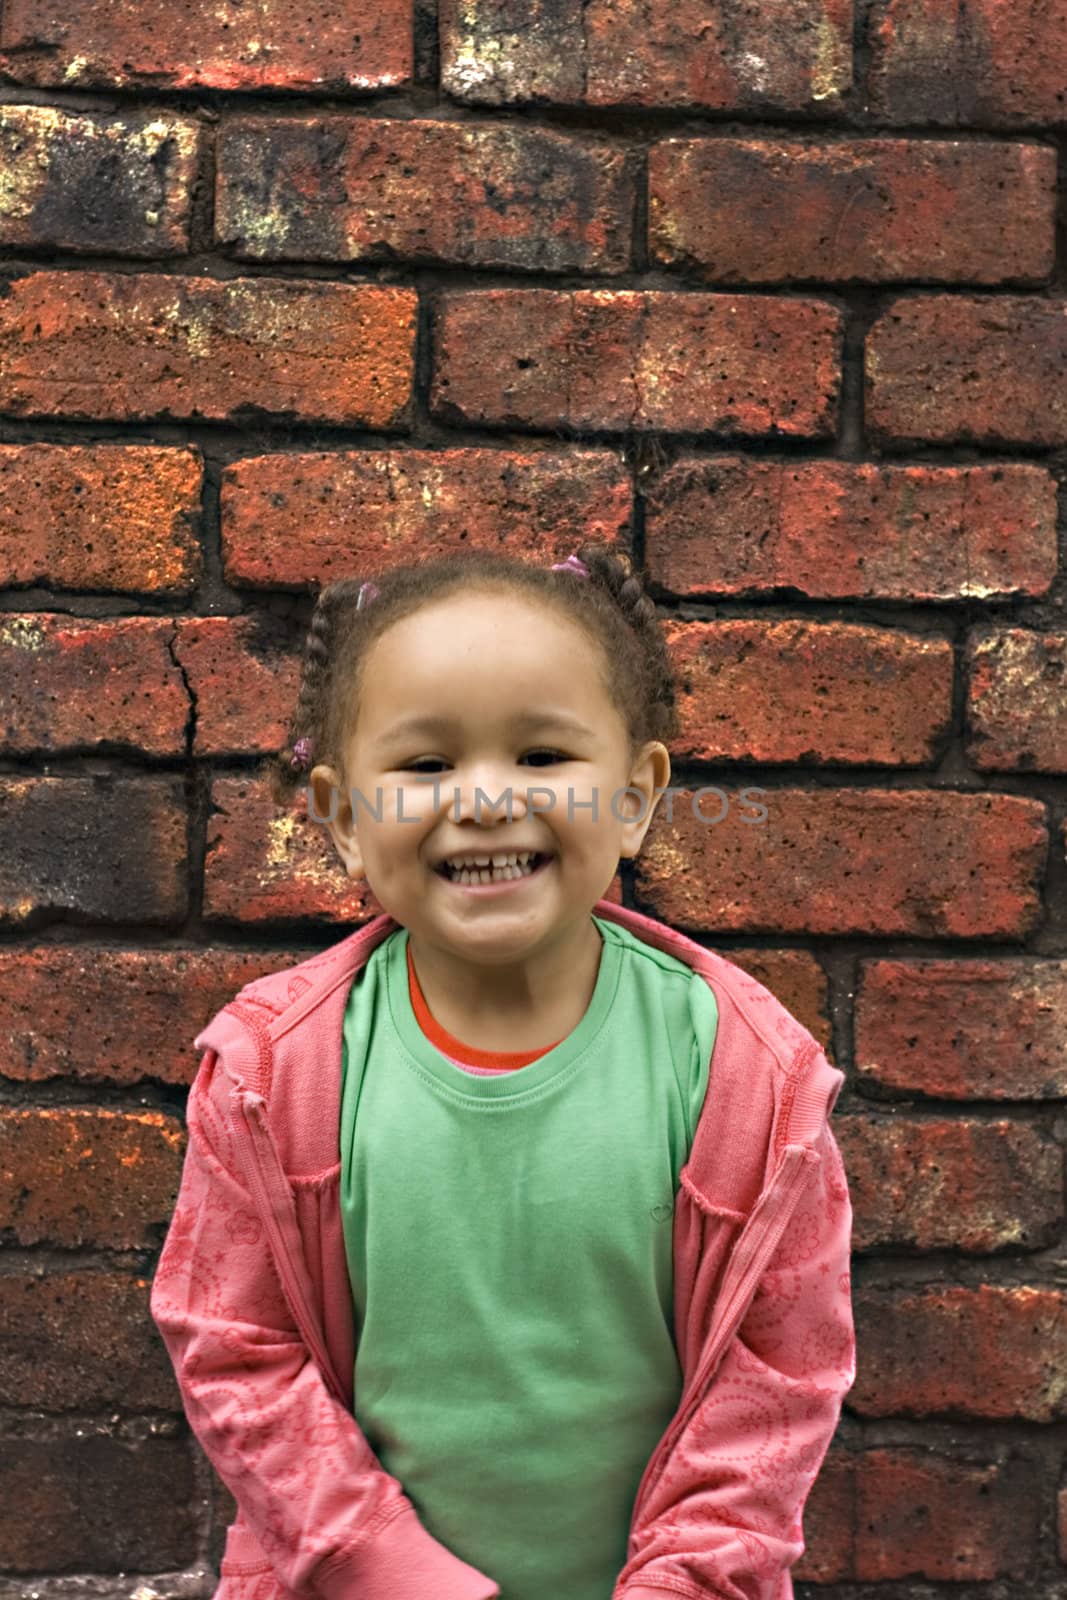 Young black baby girl playing in an alley by illu